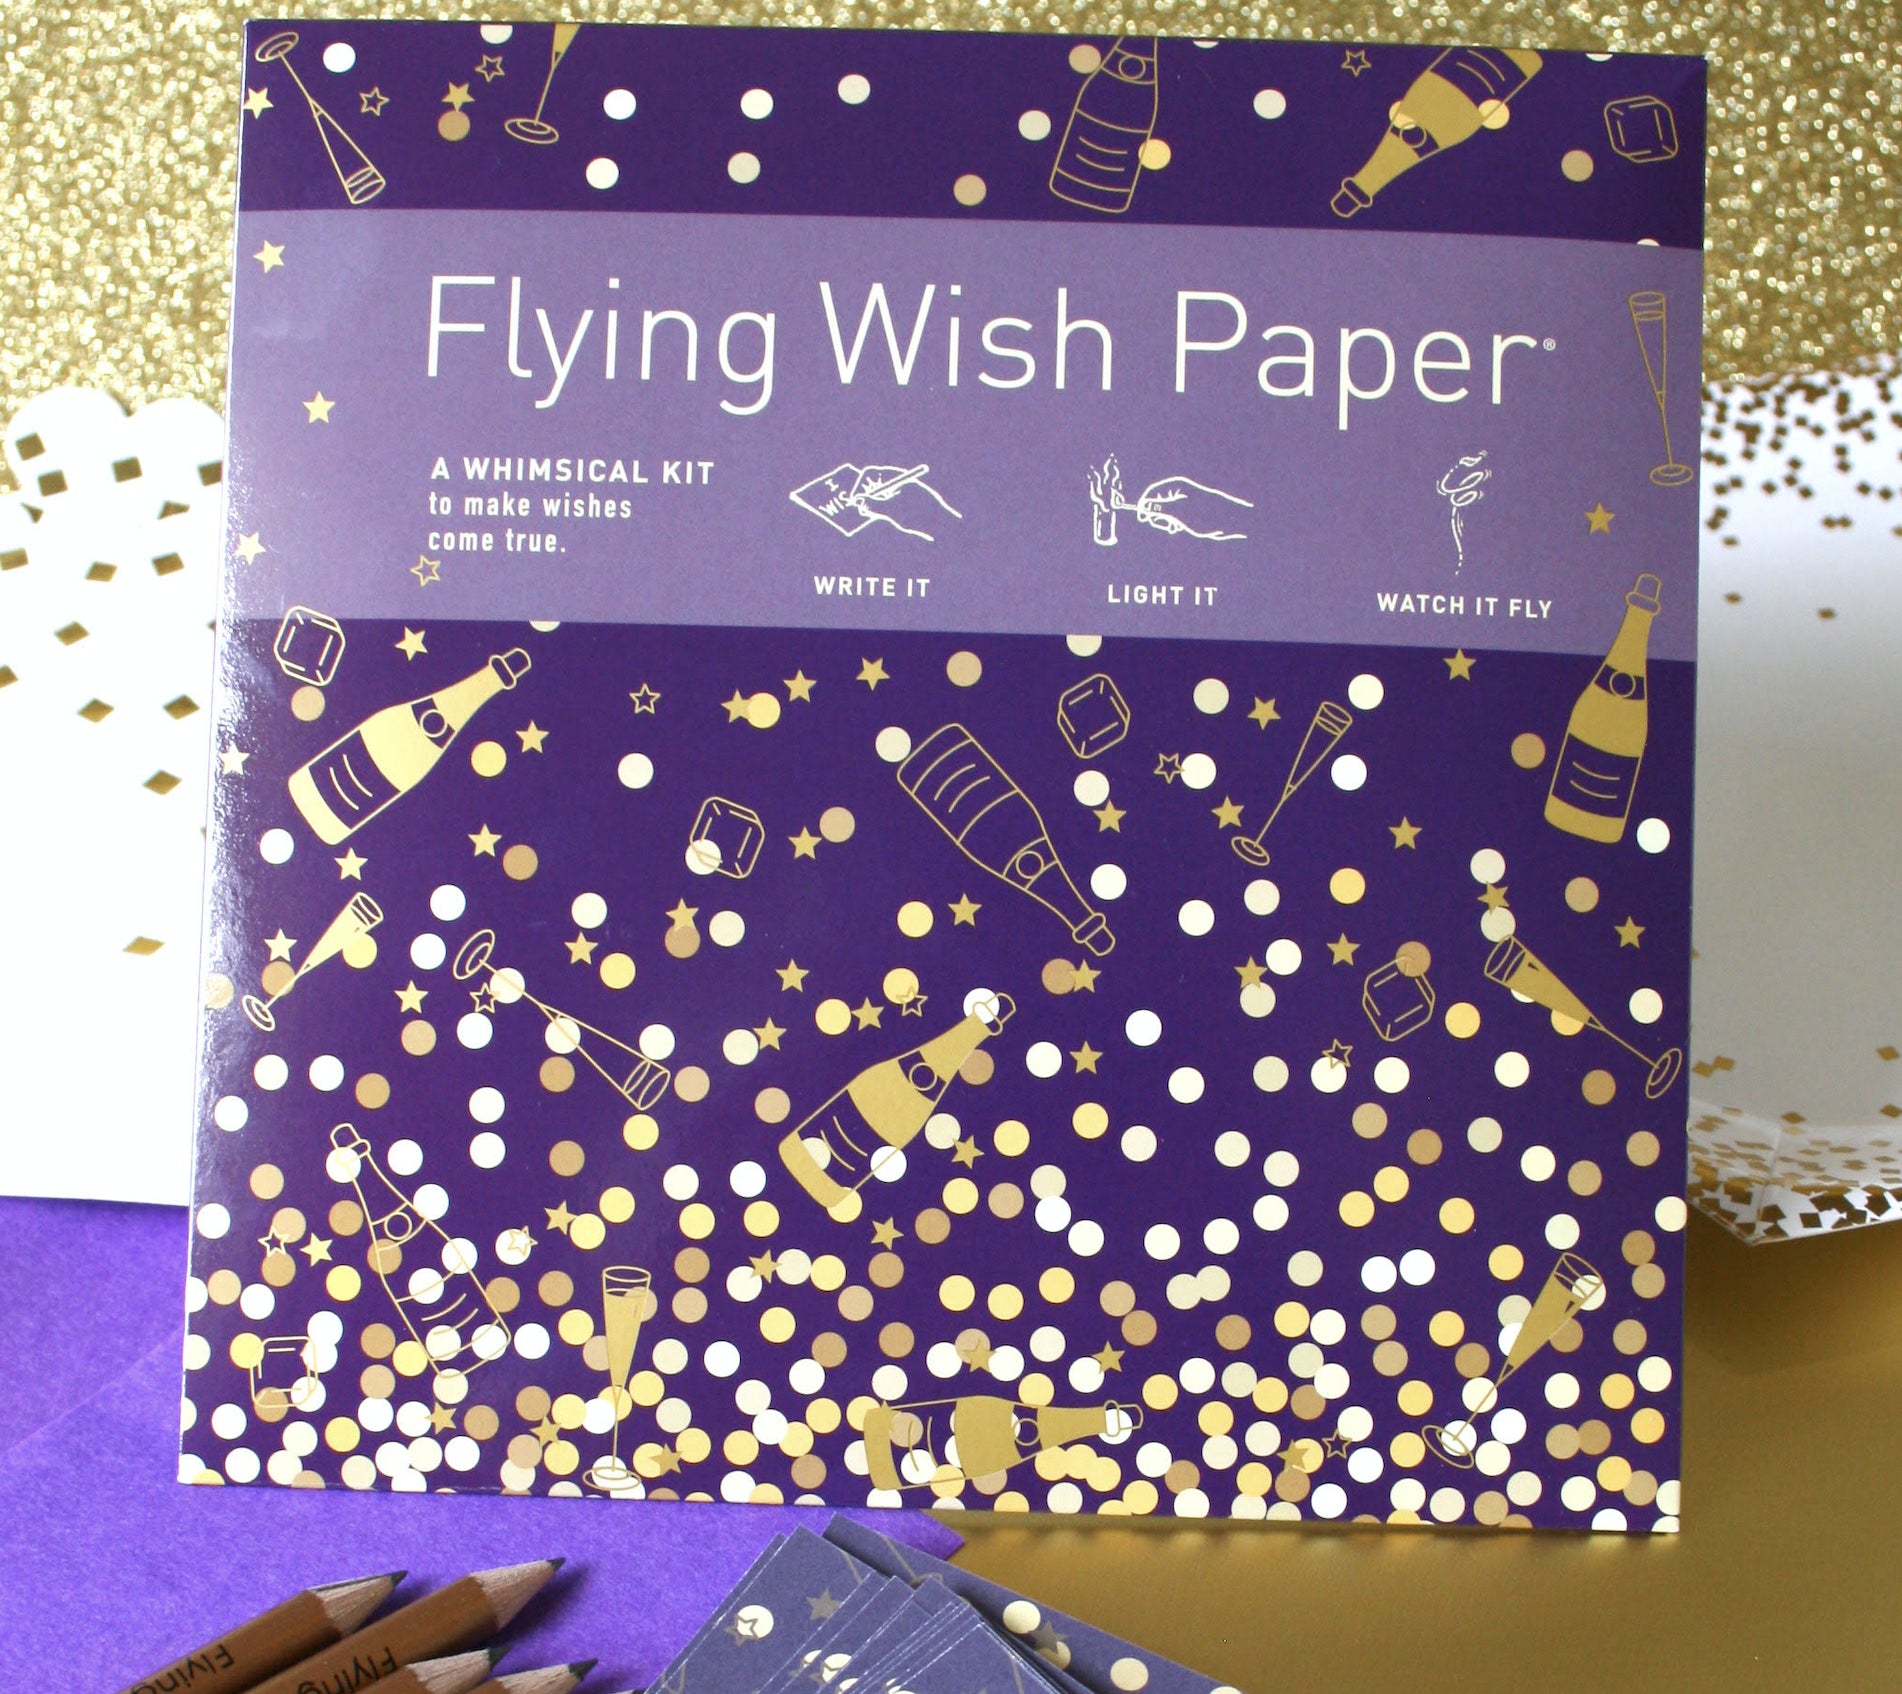 Champagne Flying Wish Paper (Large with 50 Wishes + Accessories)